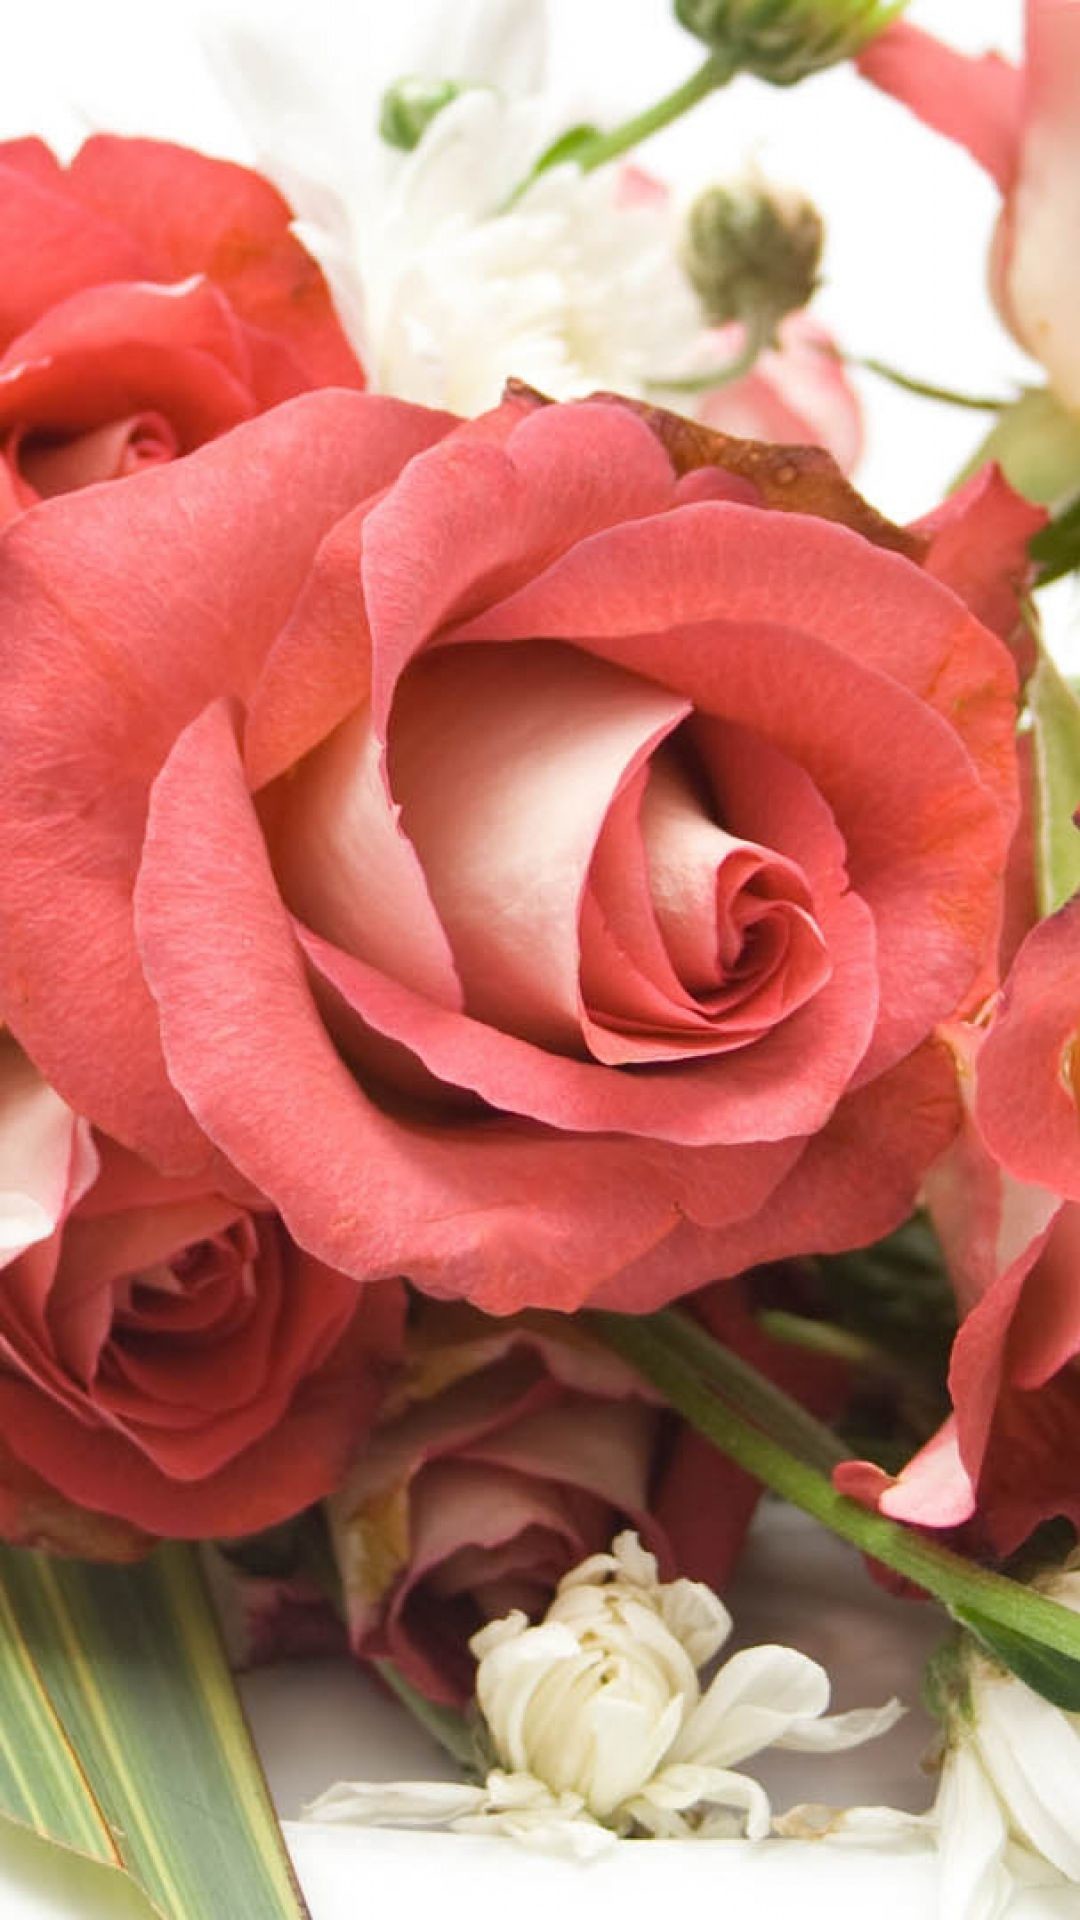 1080x1920 Pin by Syeda Nabia on wallpapers | Pinterest | Rose flower photos, Beautiful  roses and Beautiful red roses